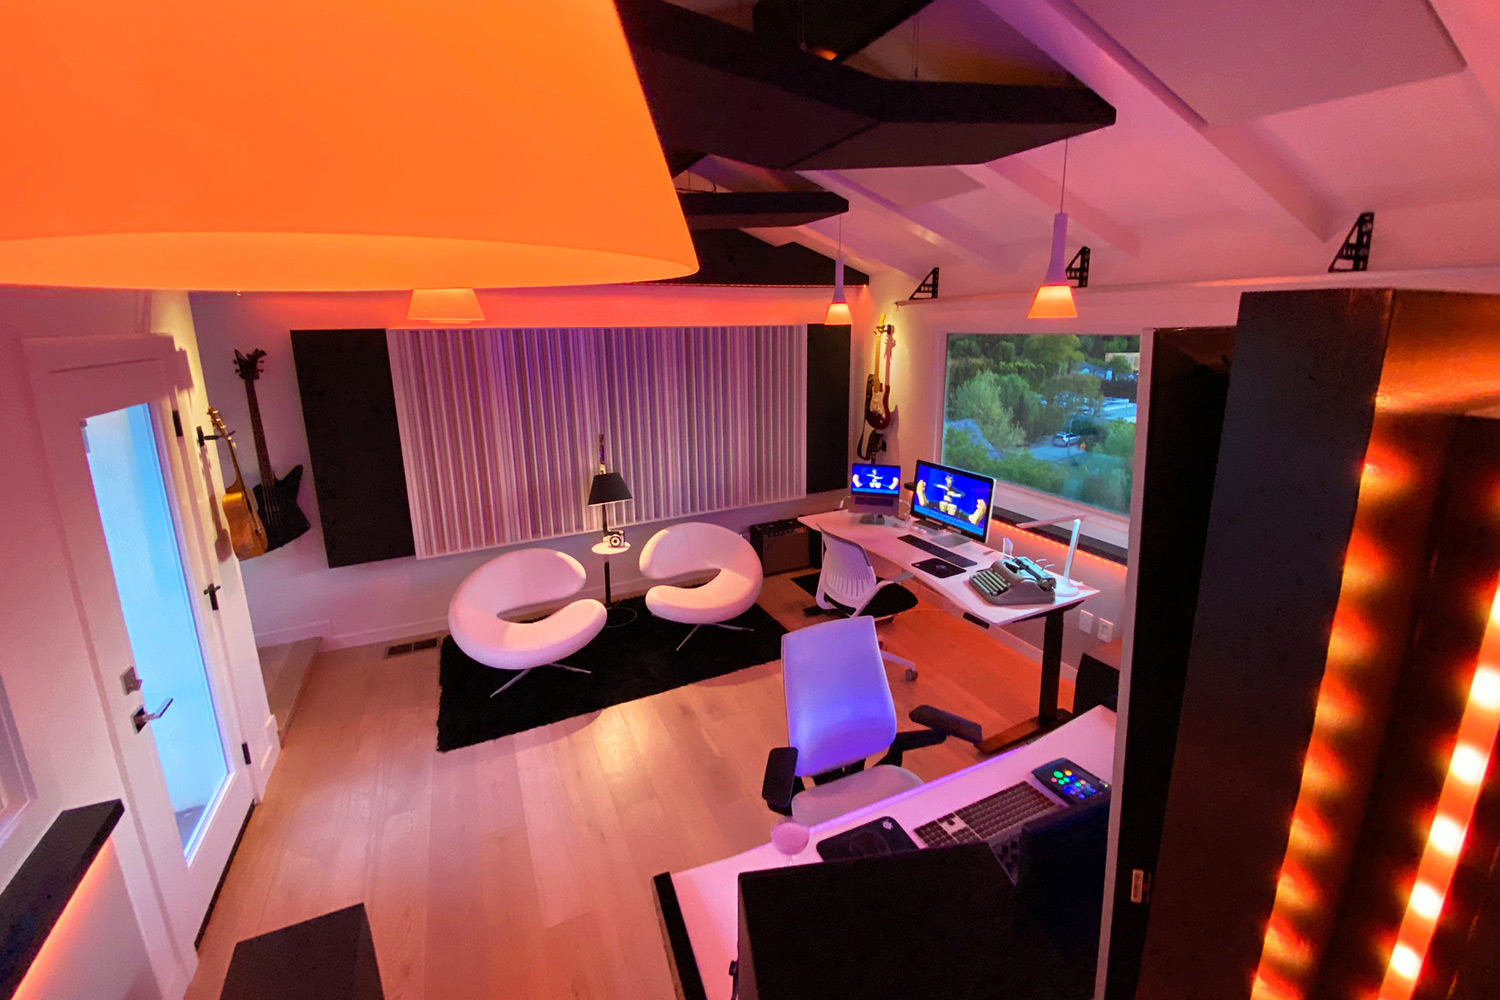 Multi-talented Scooter Pietsch conceived a professionally designed CR/Recording/Mixing room and retained WSDG to design his new studio. Control Room back view.